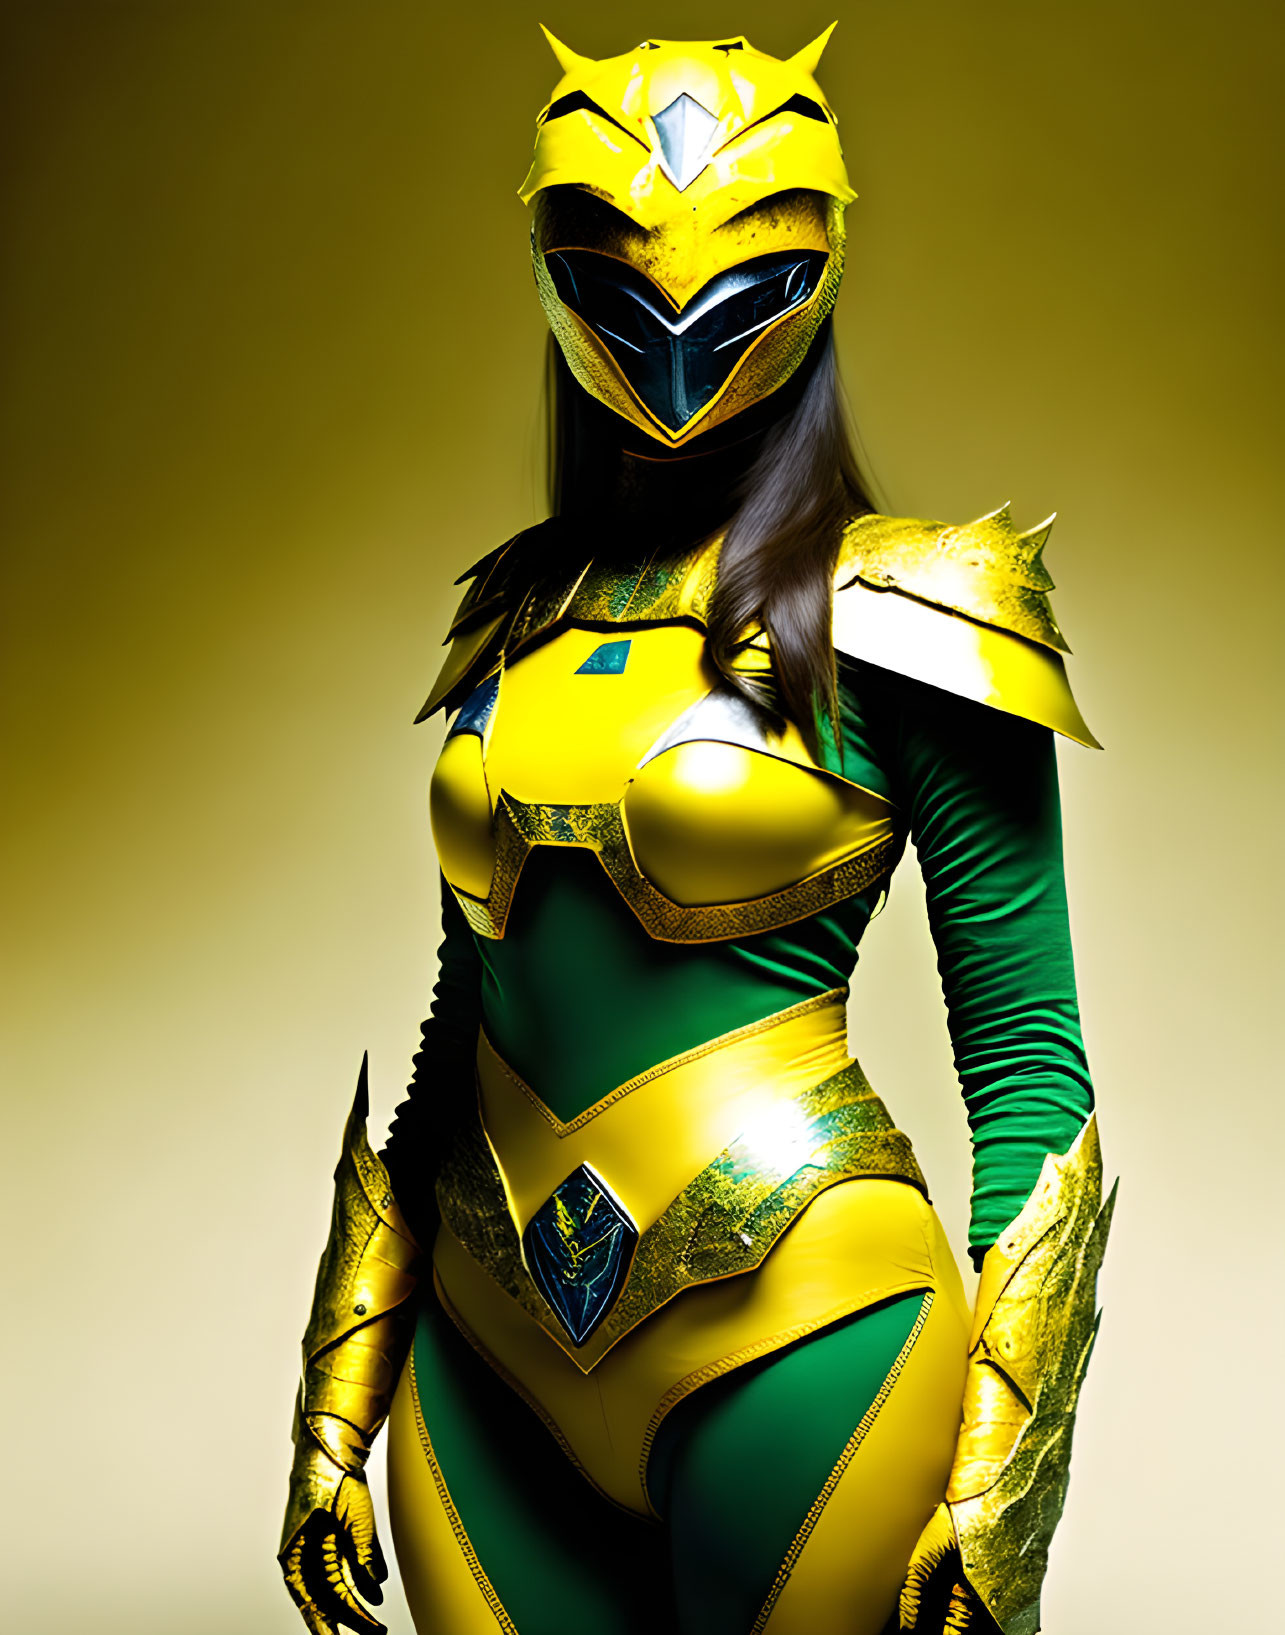 Yellow and Green Armored Superhero Costume on Gradient Background